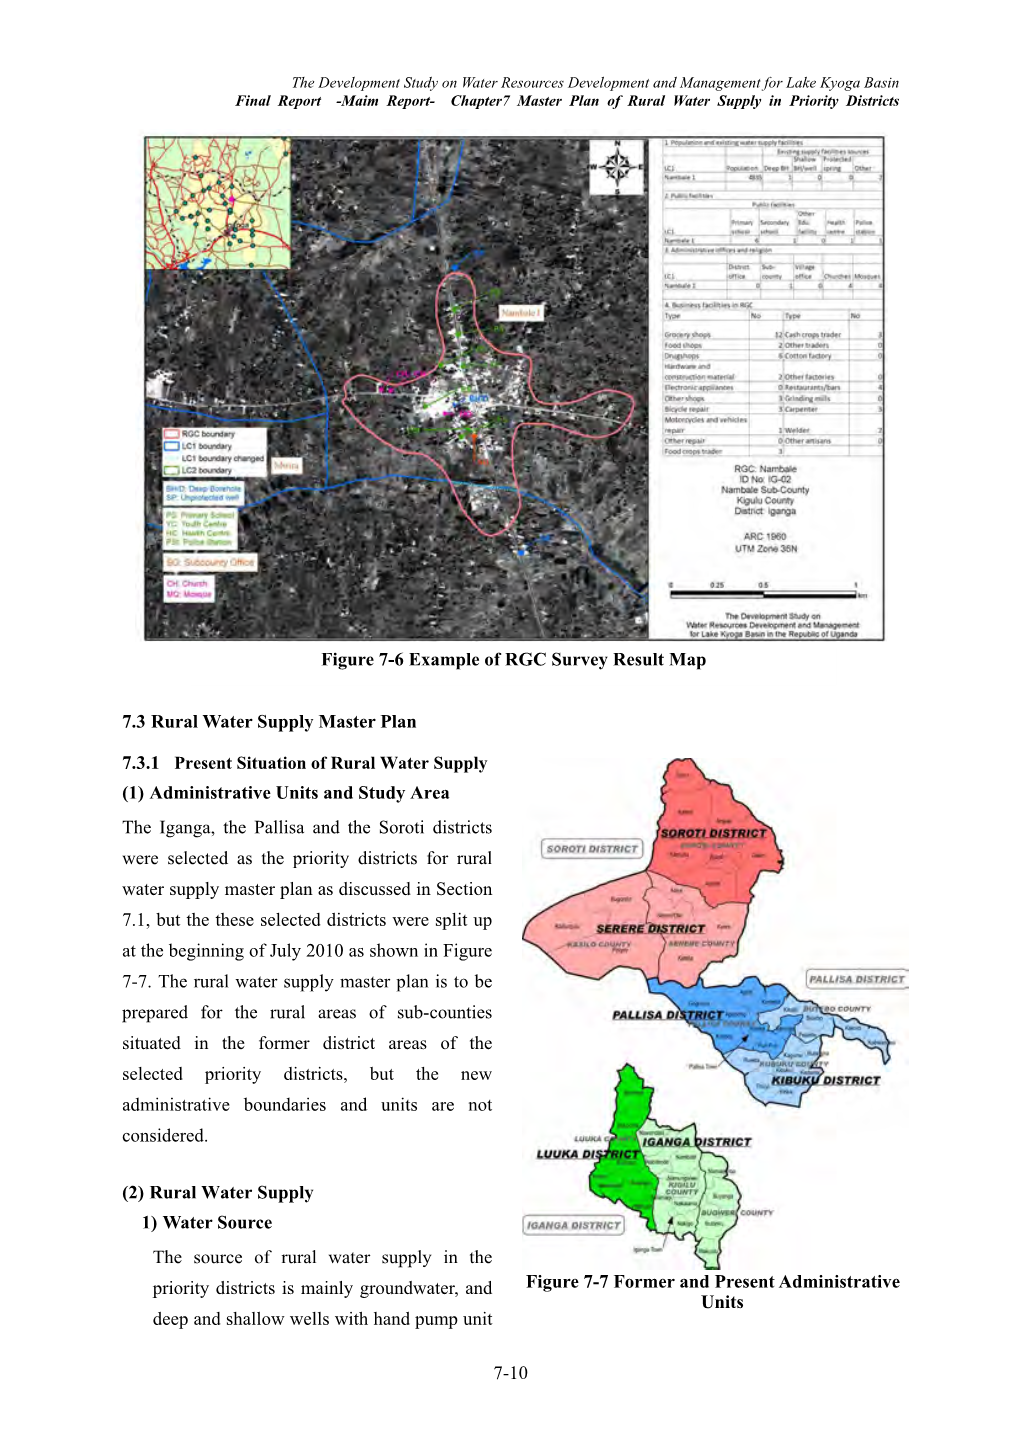 7-10 7.3 Rural Water Supply Master Plan (1) Administrative Units and Study Area the Iganga, the Pallisa and the Soroti Districts